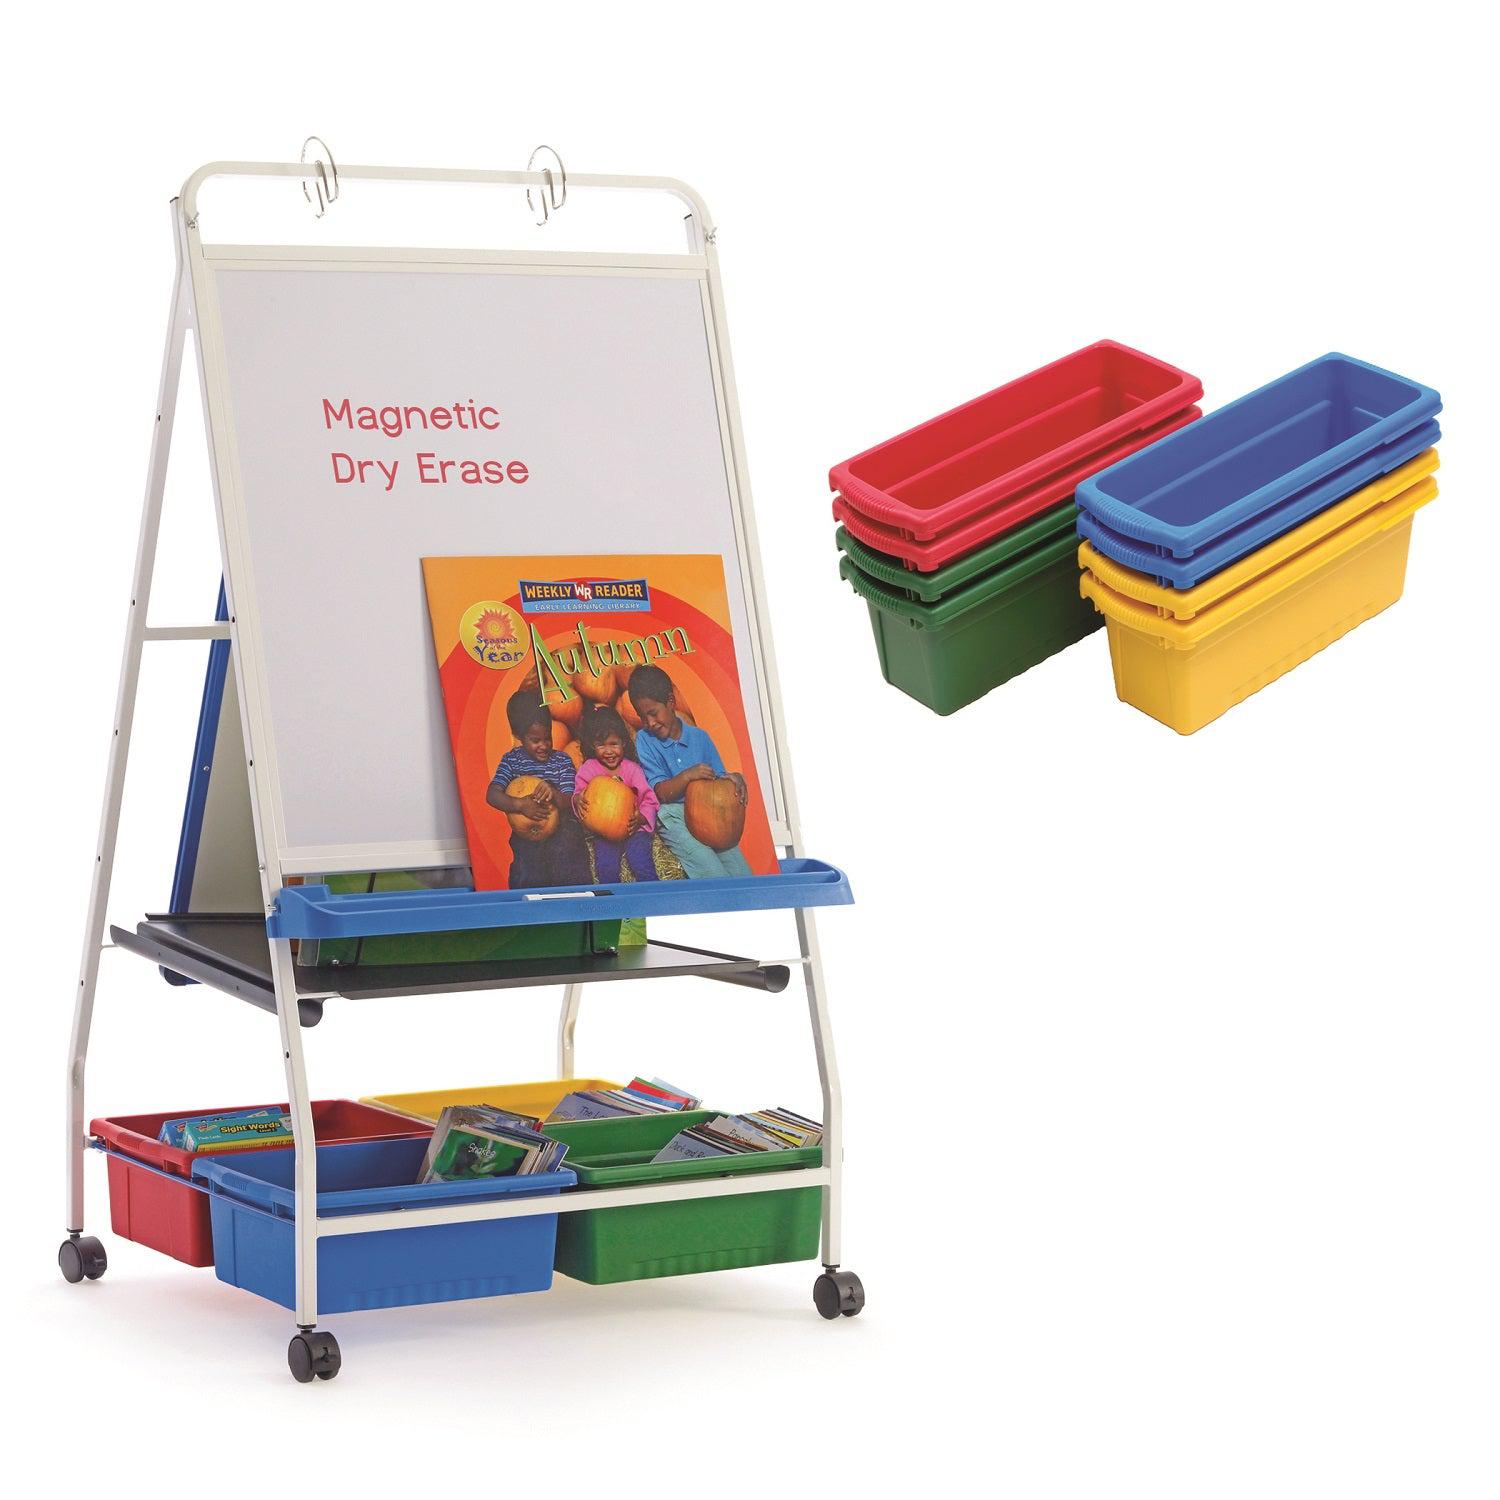 Classic Royal Reading/Writing Center with 8 Small Open Tubs